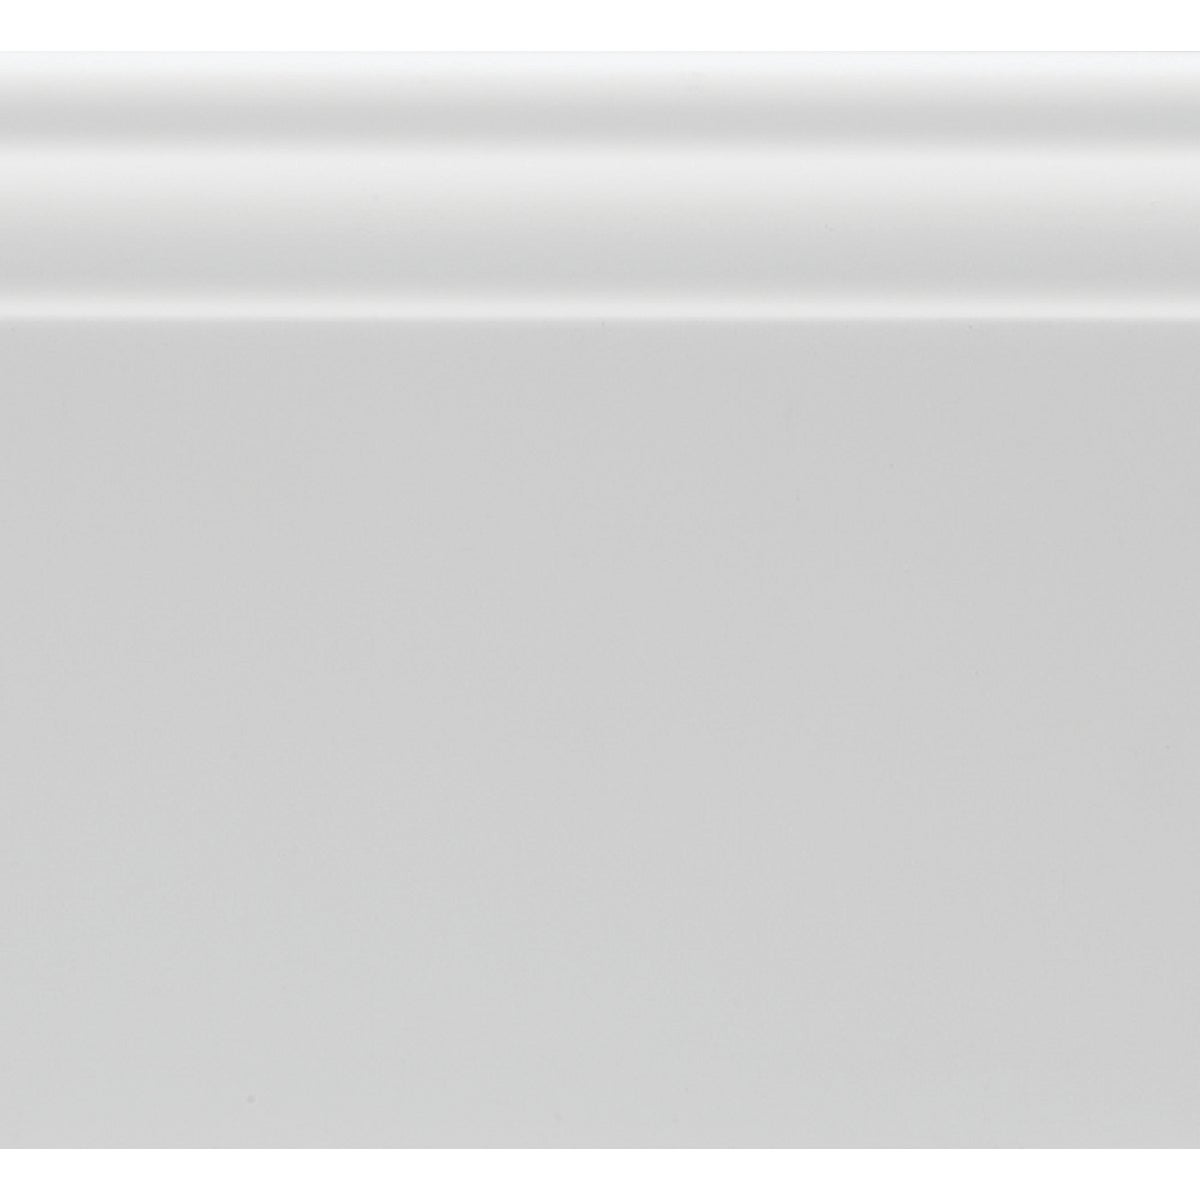 Royal 9/16 In. W. x 3-1/4 In. H. x 8 Ft. L. White PVC Colonial Base Molding